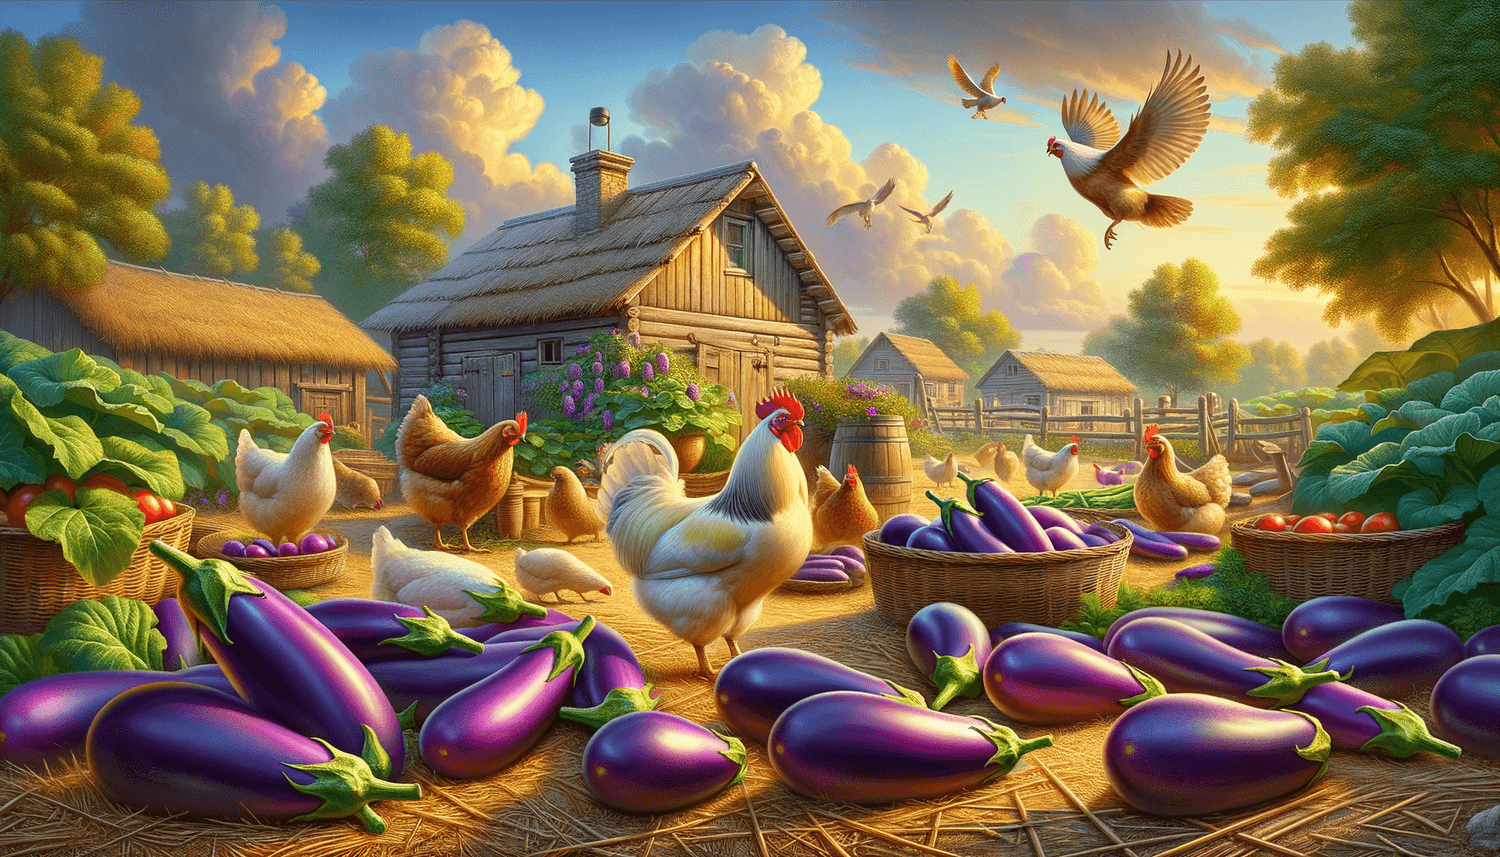 Can Chickens Eat Eggplants?